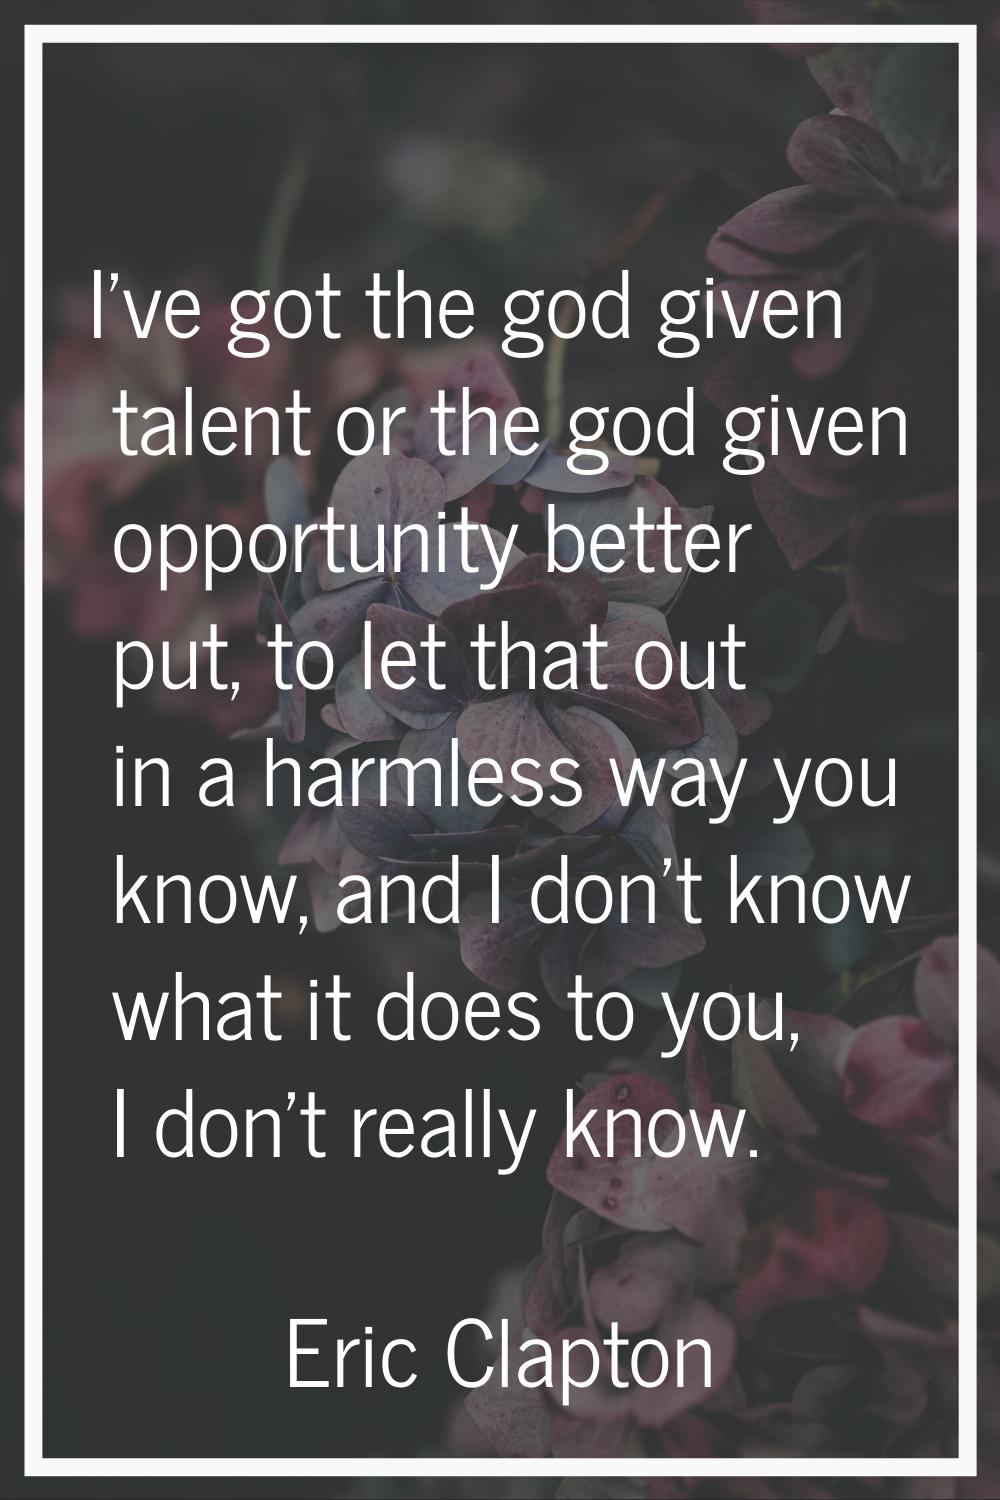 I've got the god given talent or the god given opportunity better put, to let that out in a harmles